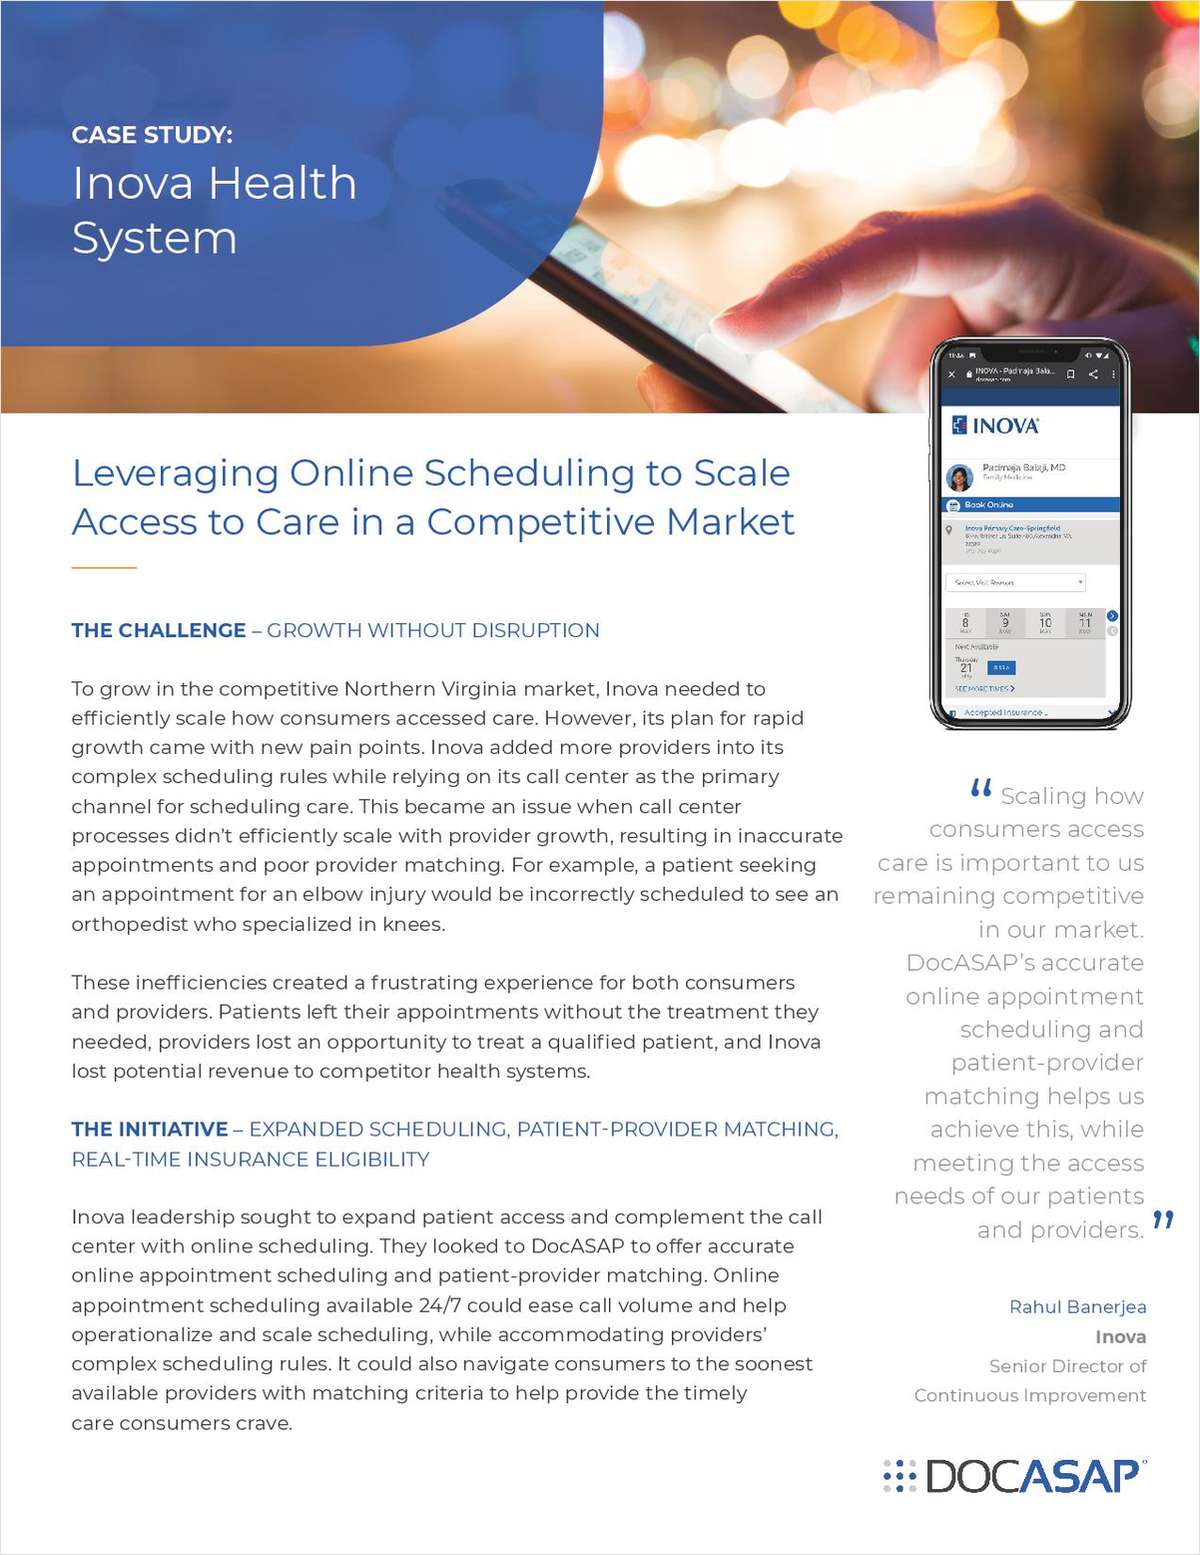 Leveraging Online Scheduling to Scale Access to Care in a Competitive Market | Inova Health System